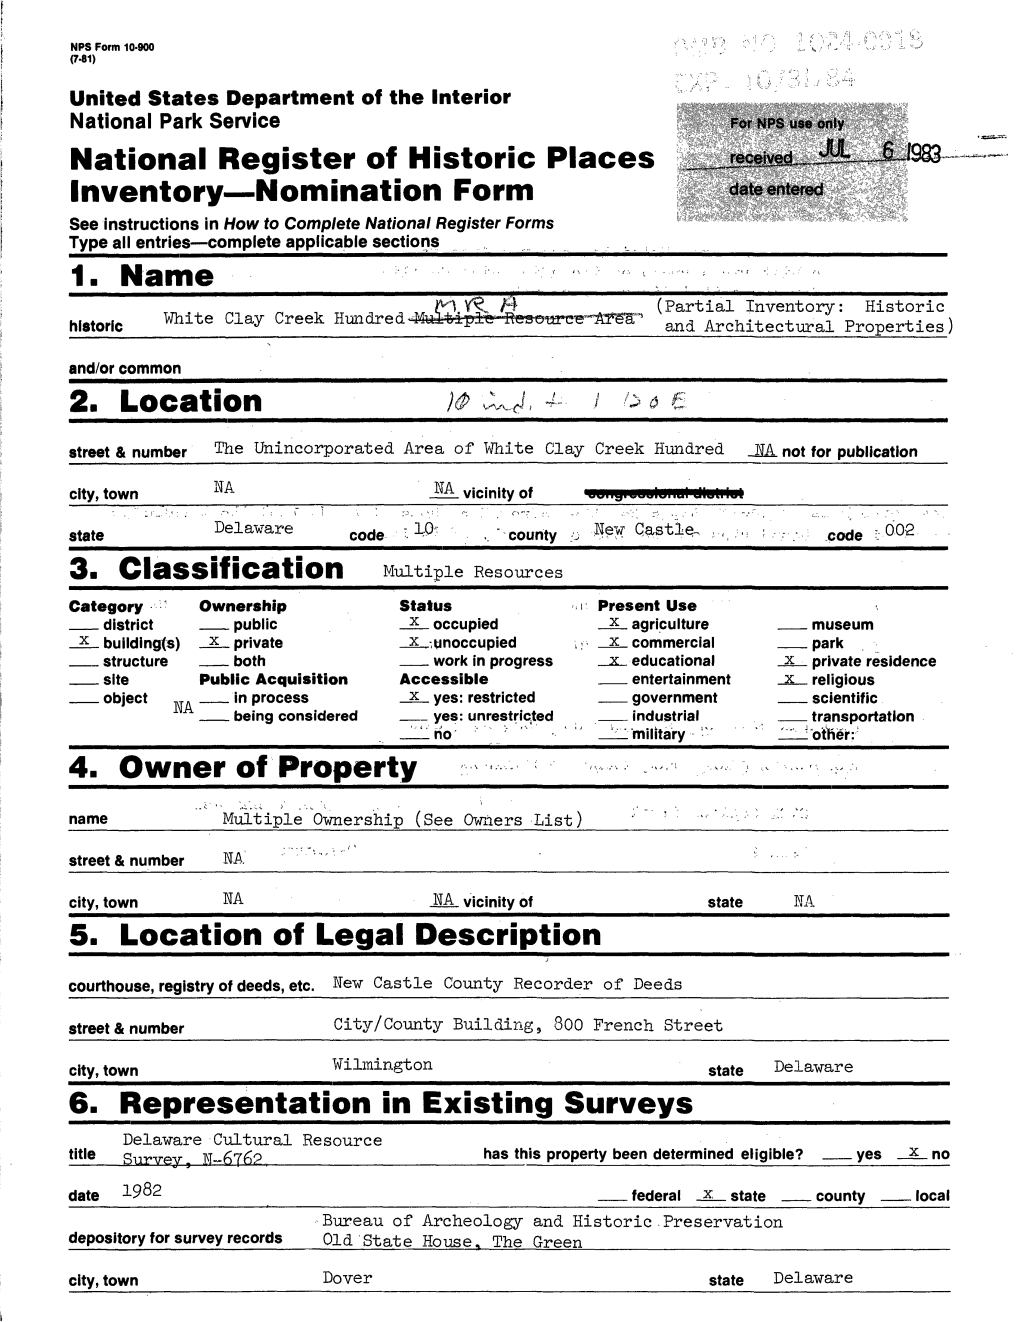 National Register of Historic Places Inventory Nomination Form 2